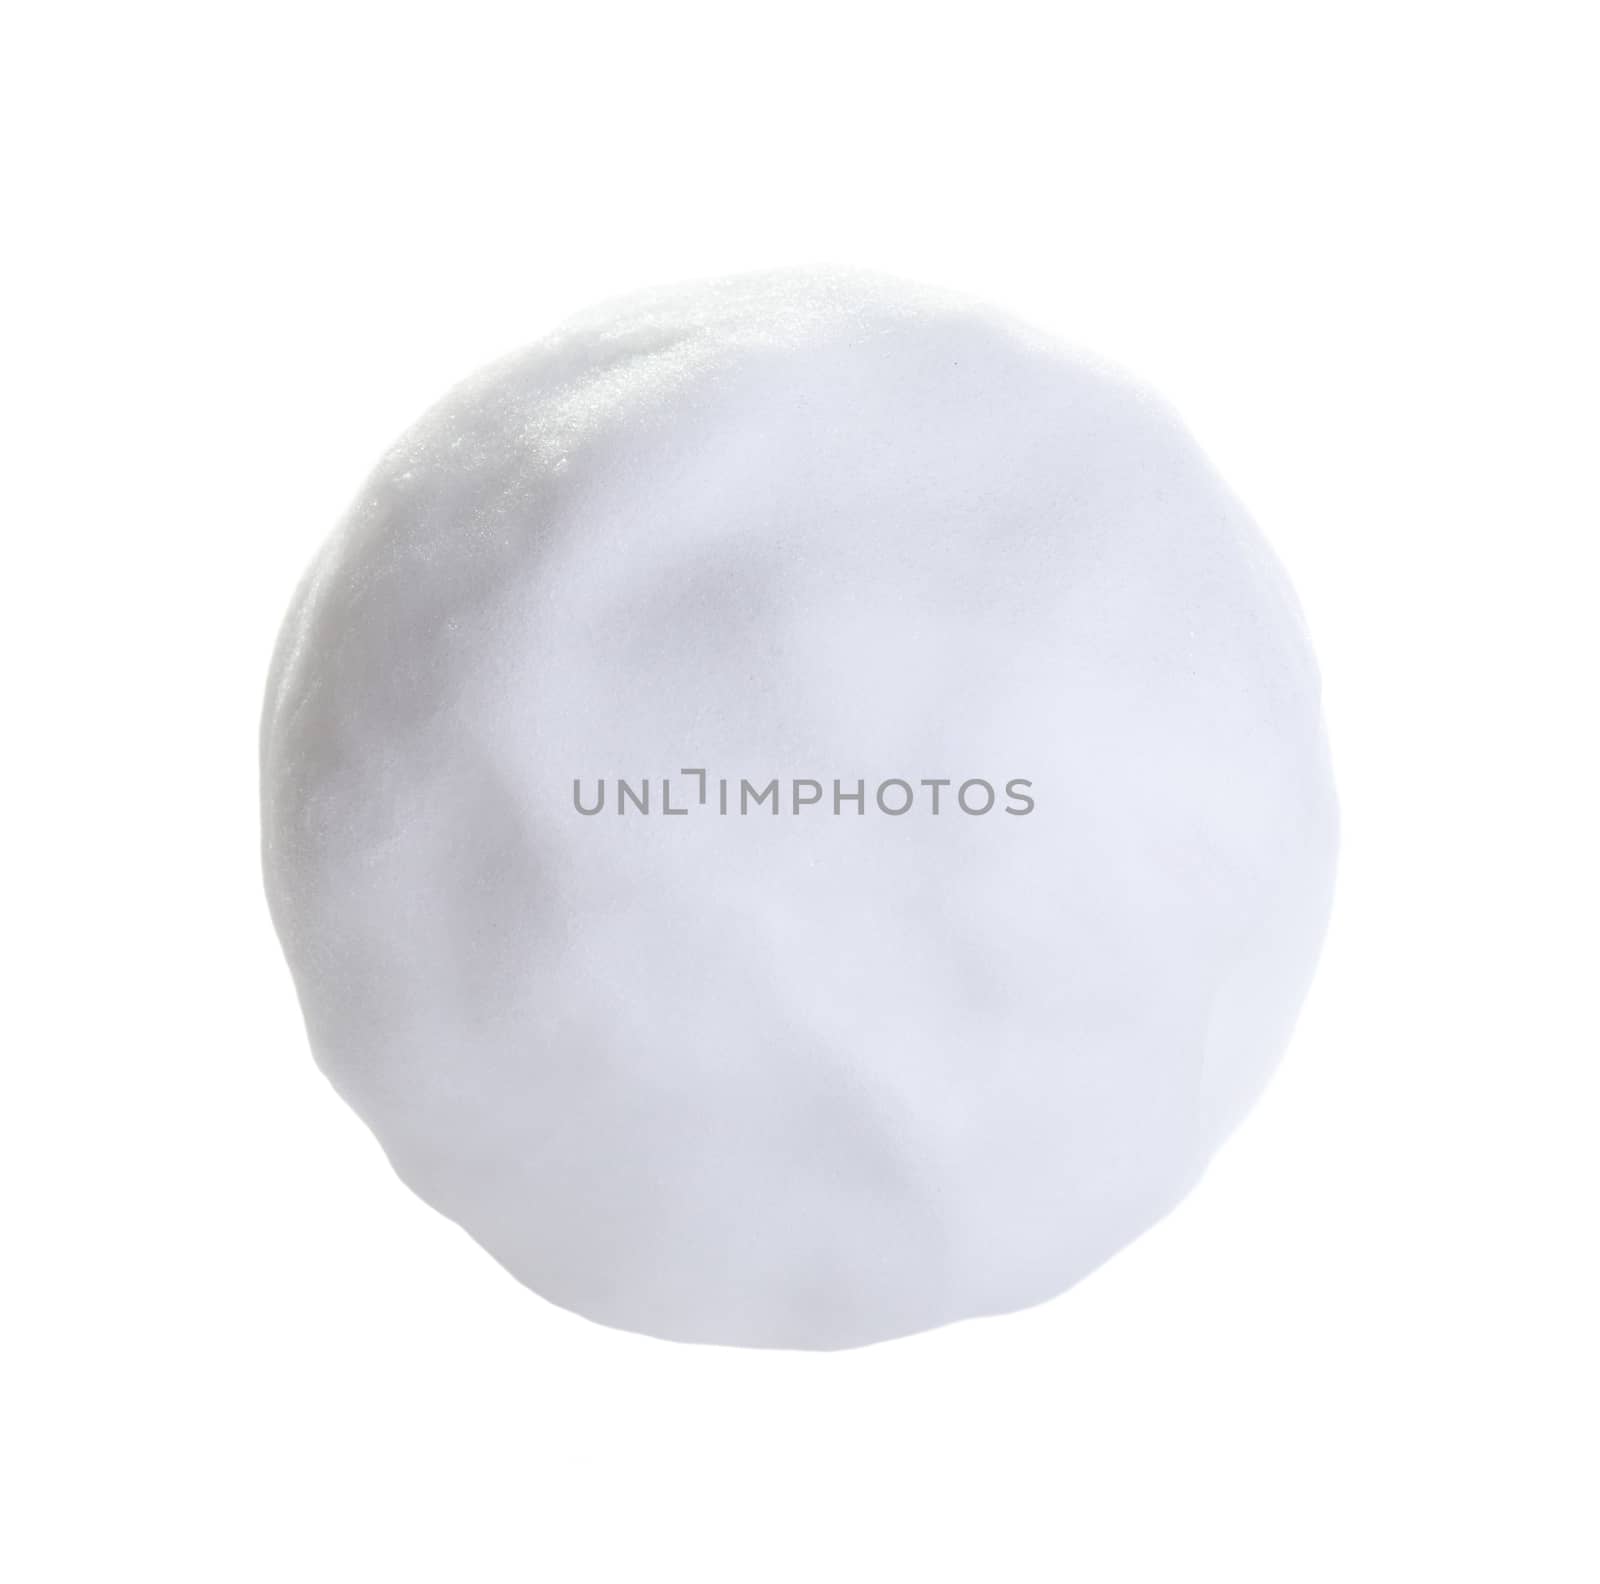 Snowball isolated on white background